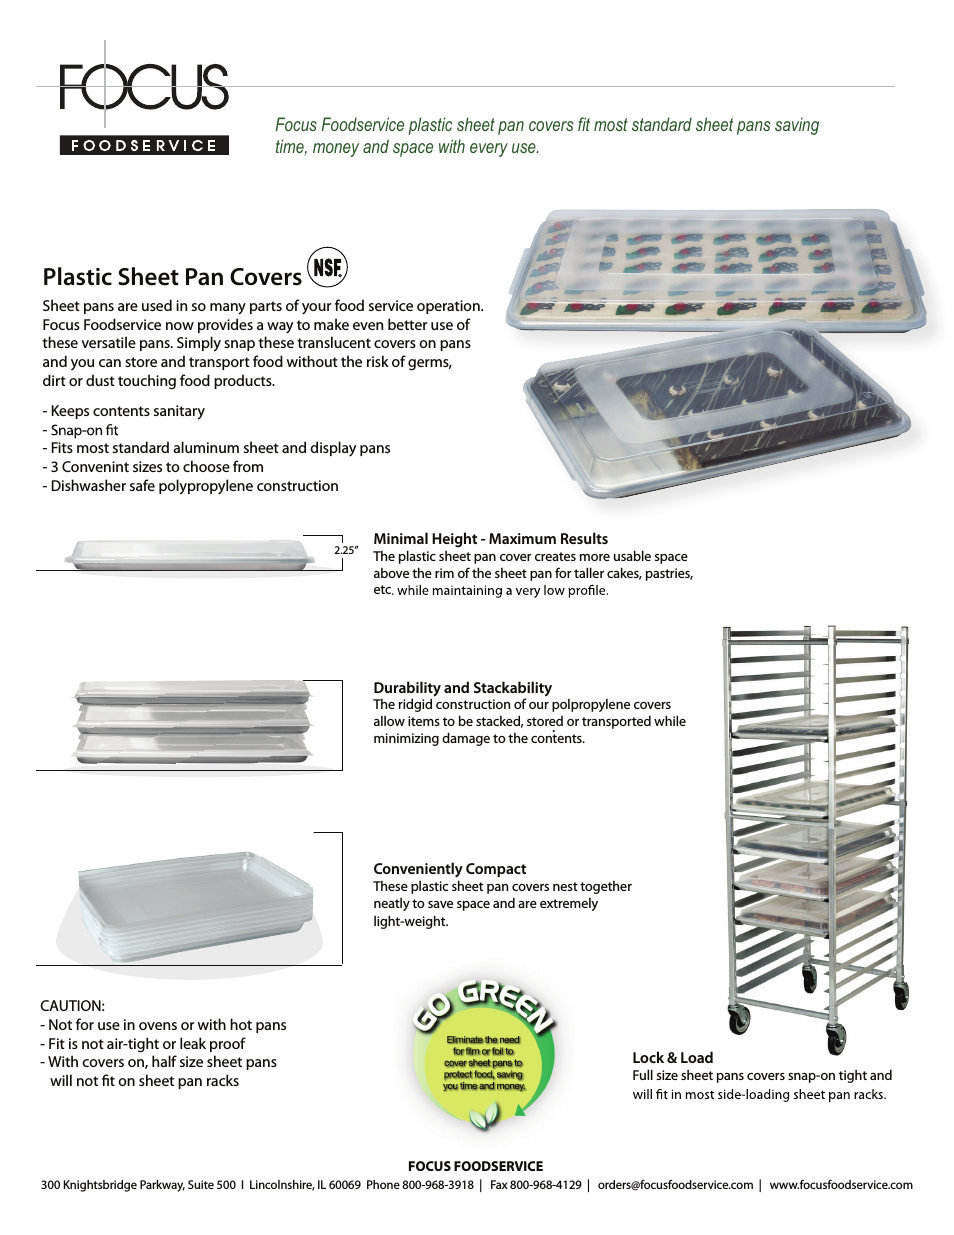 Plastic Sheet Pan Covers - Specification Sheets